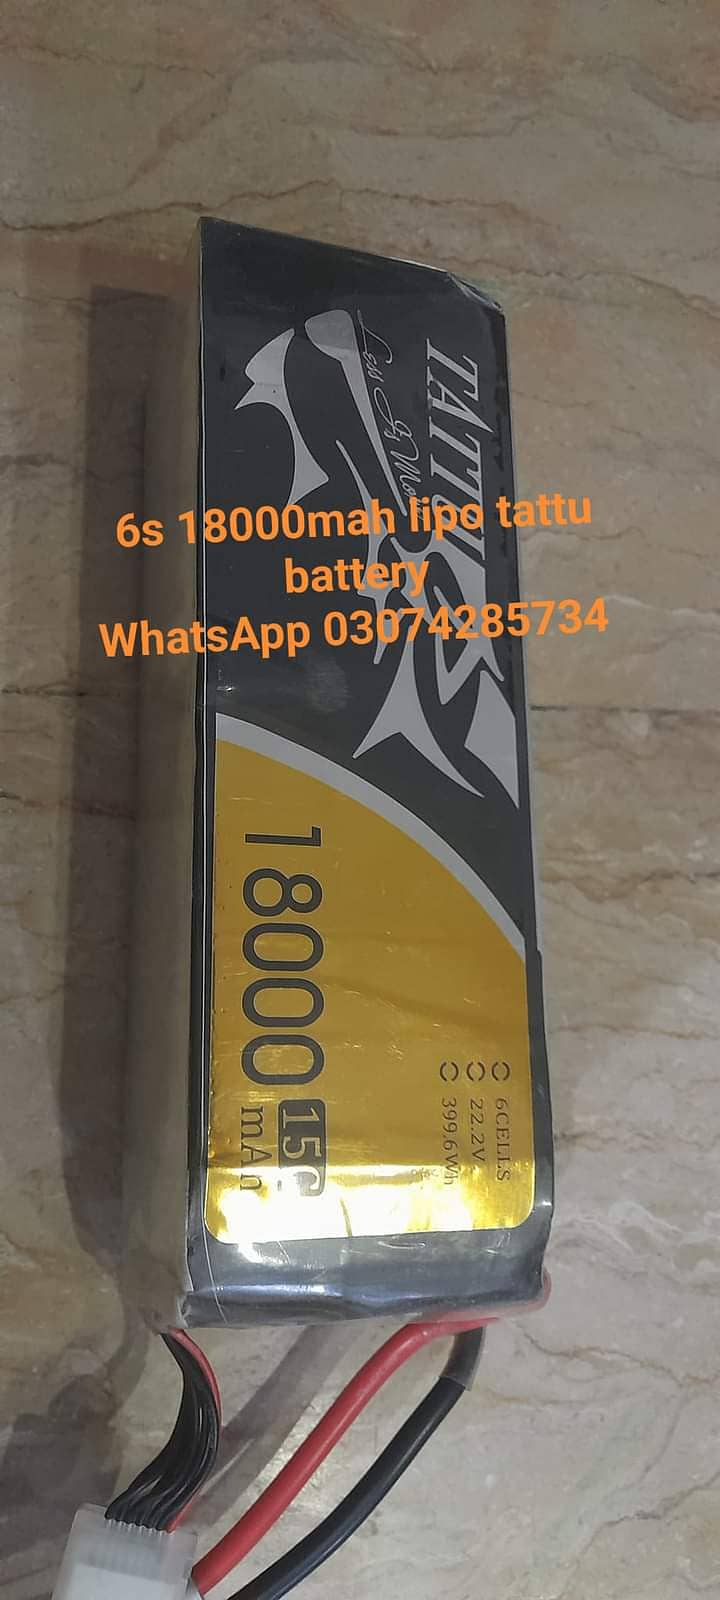 6s 18000mah tattu battery for agriculture homemade drone 1